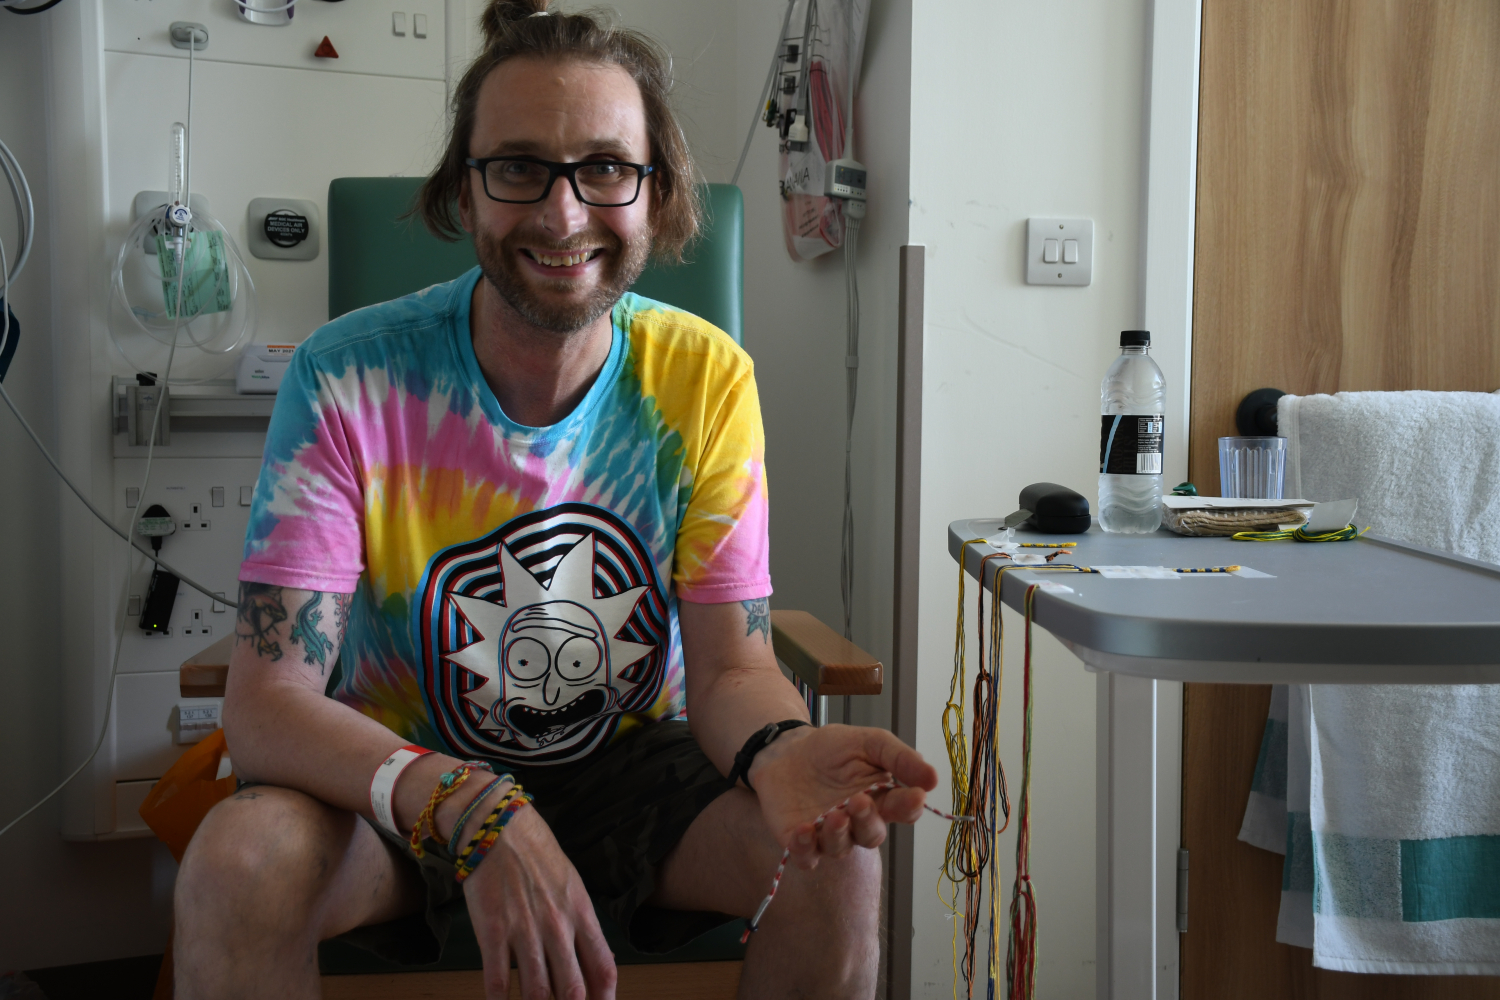 Richard has made friendship bracelets for staff who looked after him.jpg